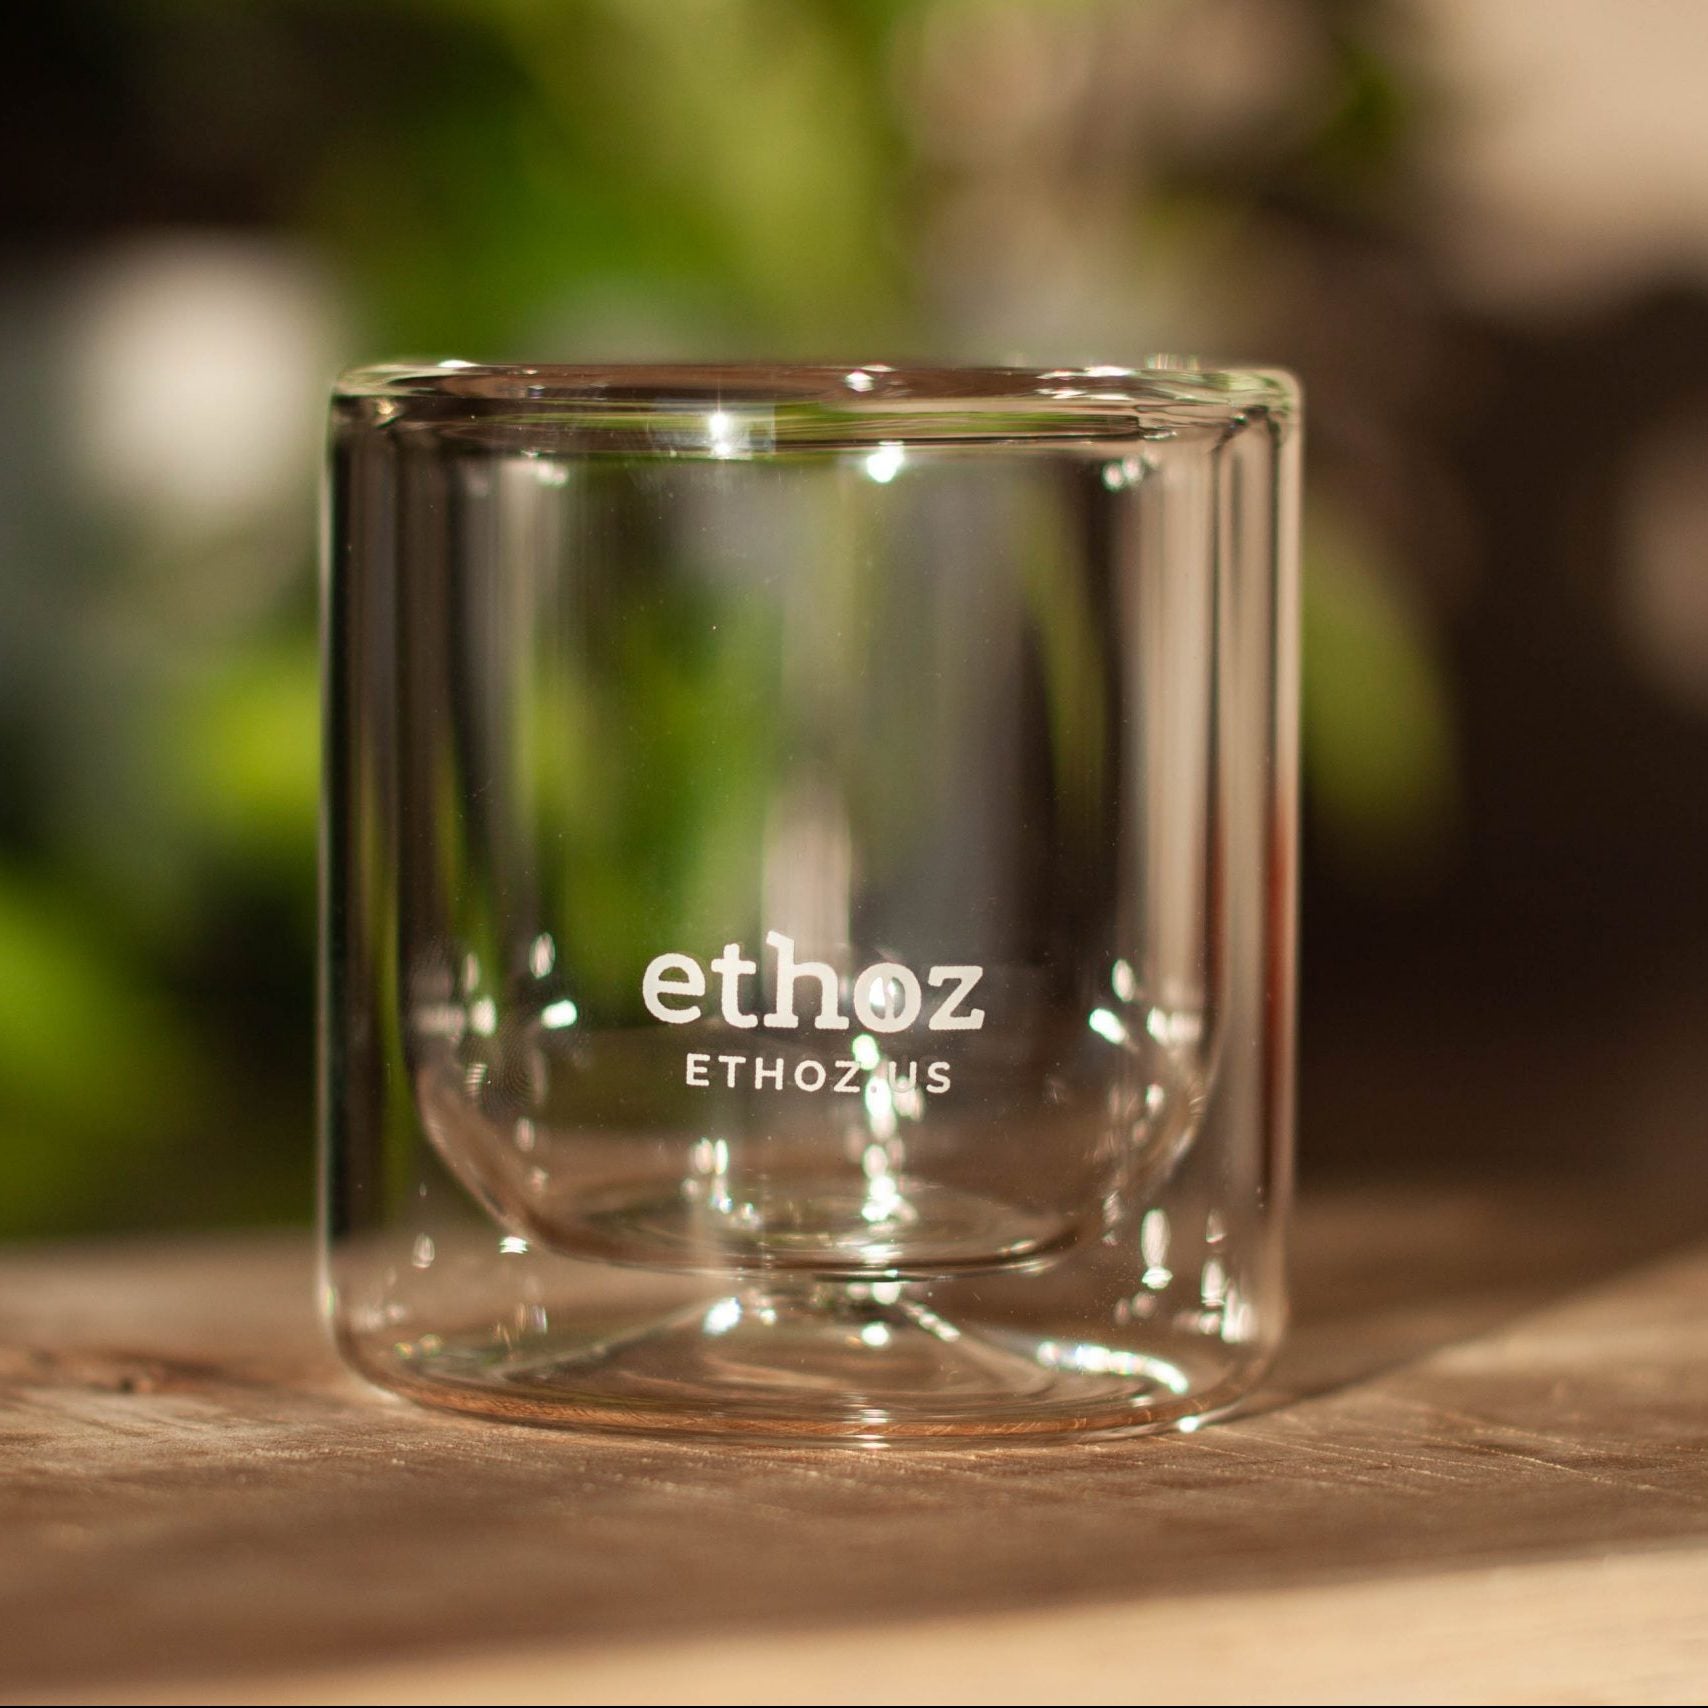 Insulated Glass Cups by ethoz® The Formosa Coffee